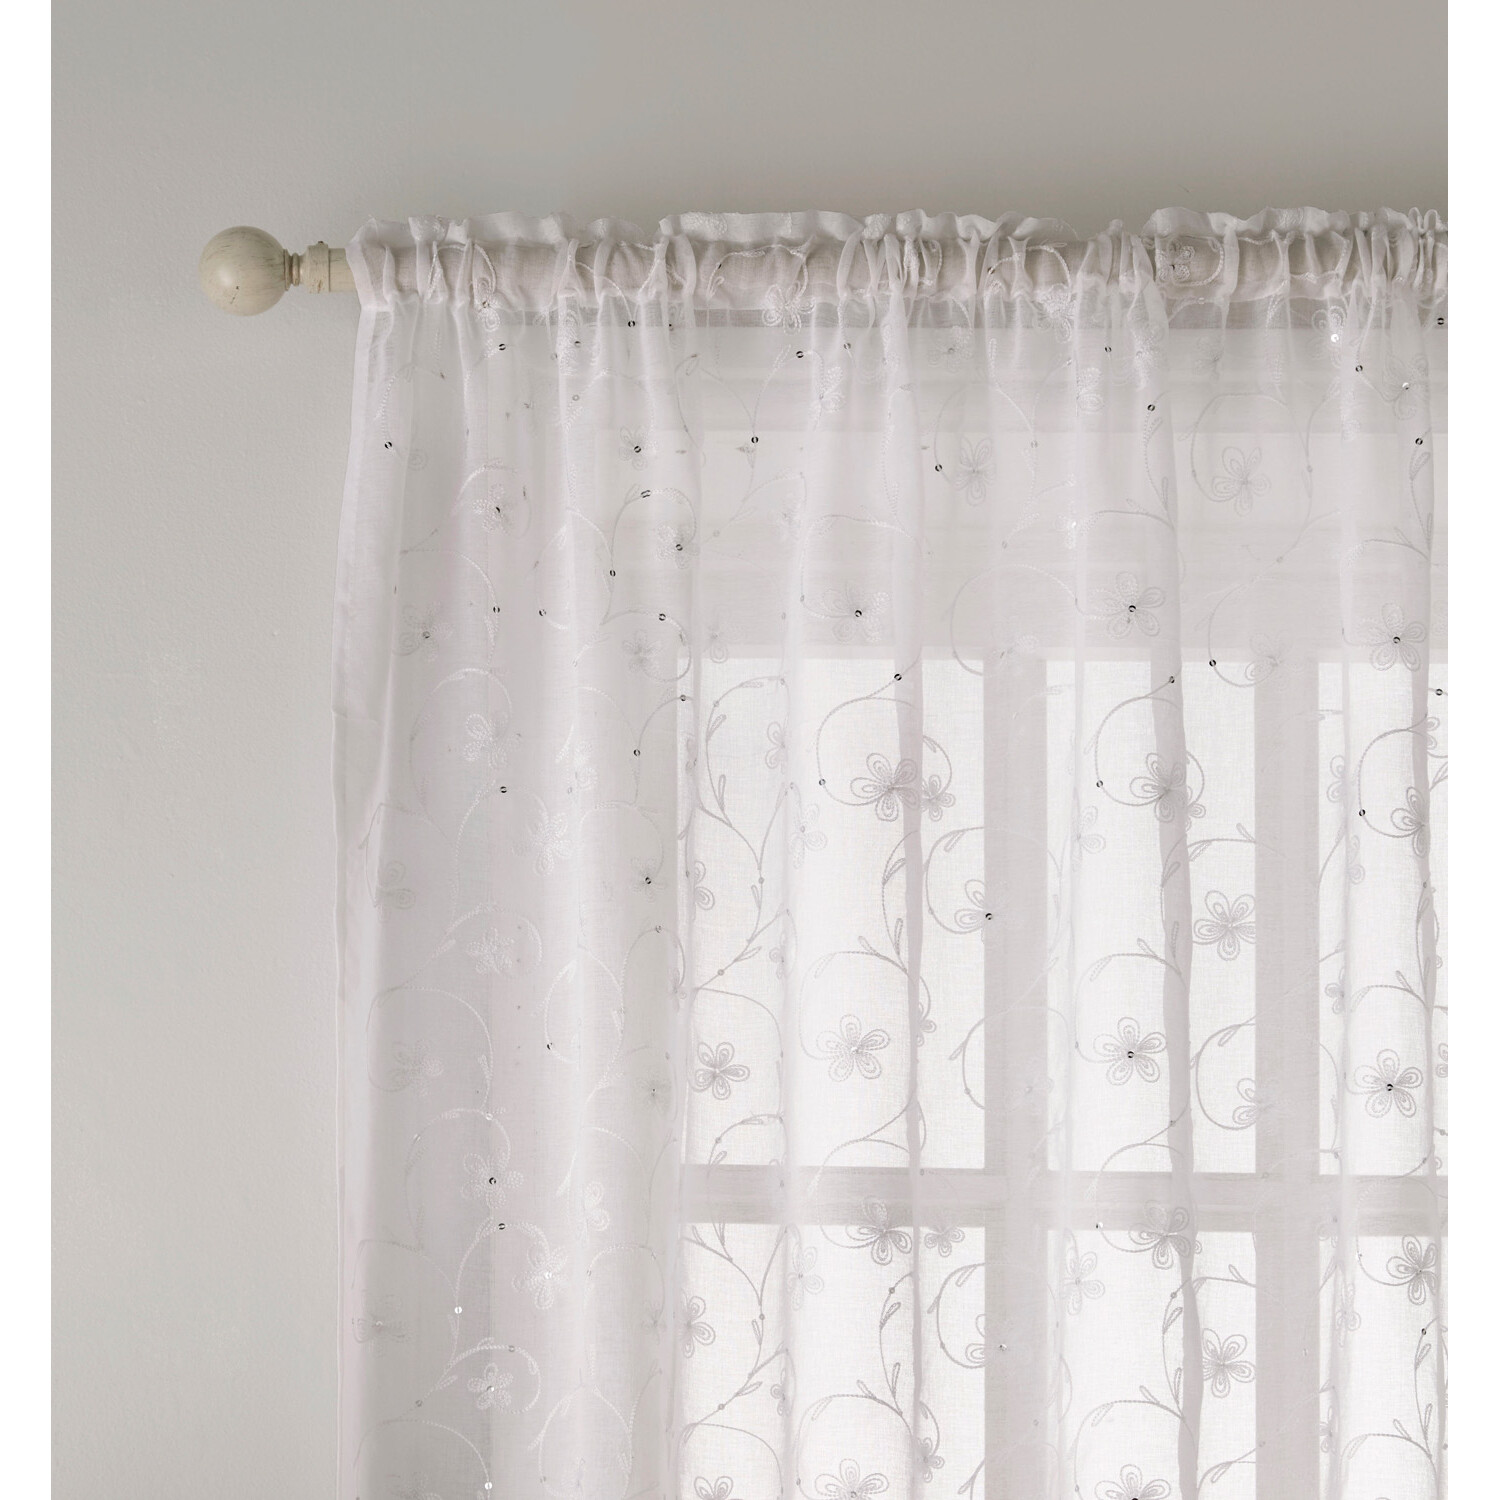 Belle White Embroidered Panel Voile Curtain 137 x 140cm Image 2